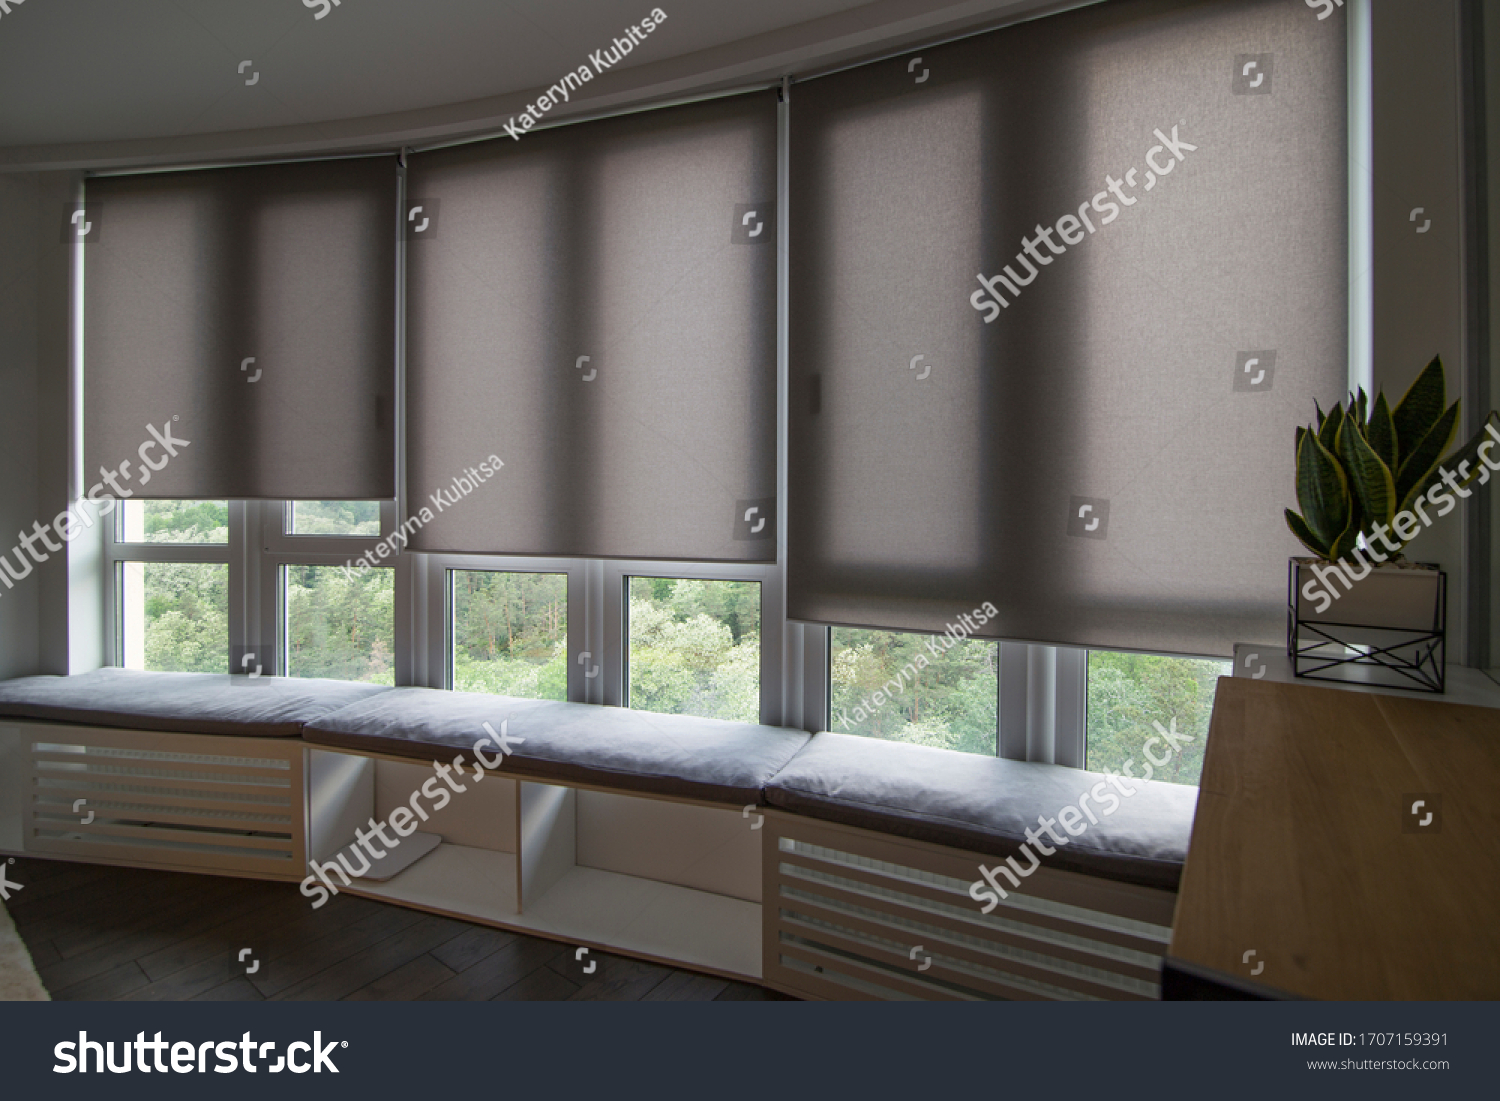 Motorized roller shades in the interior. Automatic roller blinds beige color on big glass windows. Home luxury curtaines are above the windosill with pillows. Summer. Green trees outside. #1707159391